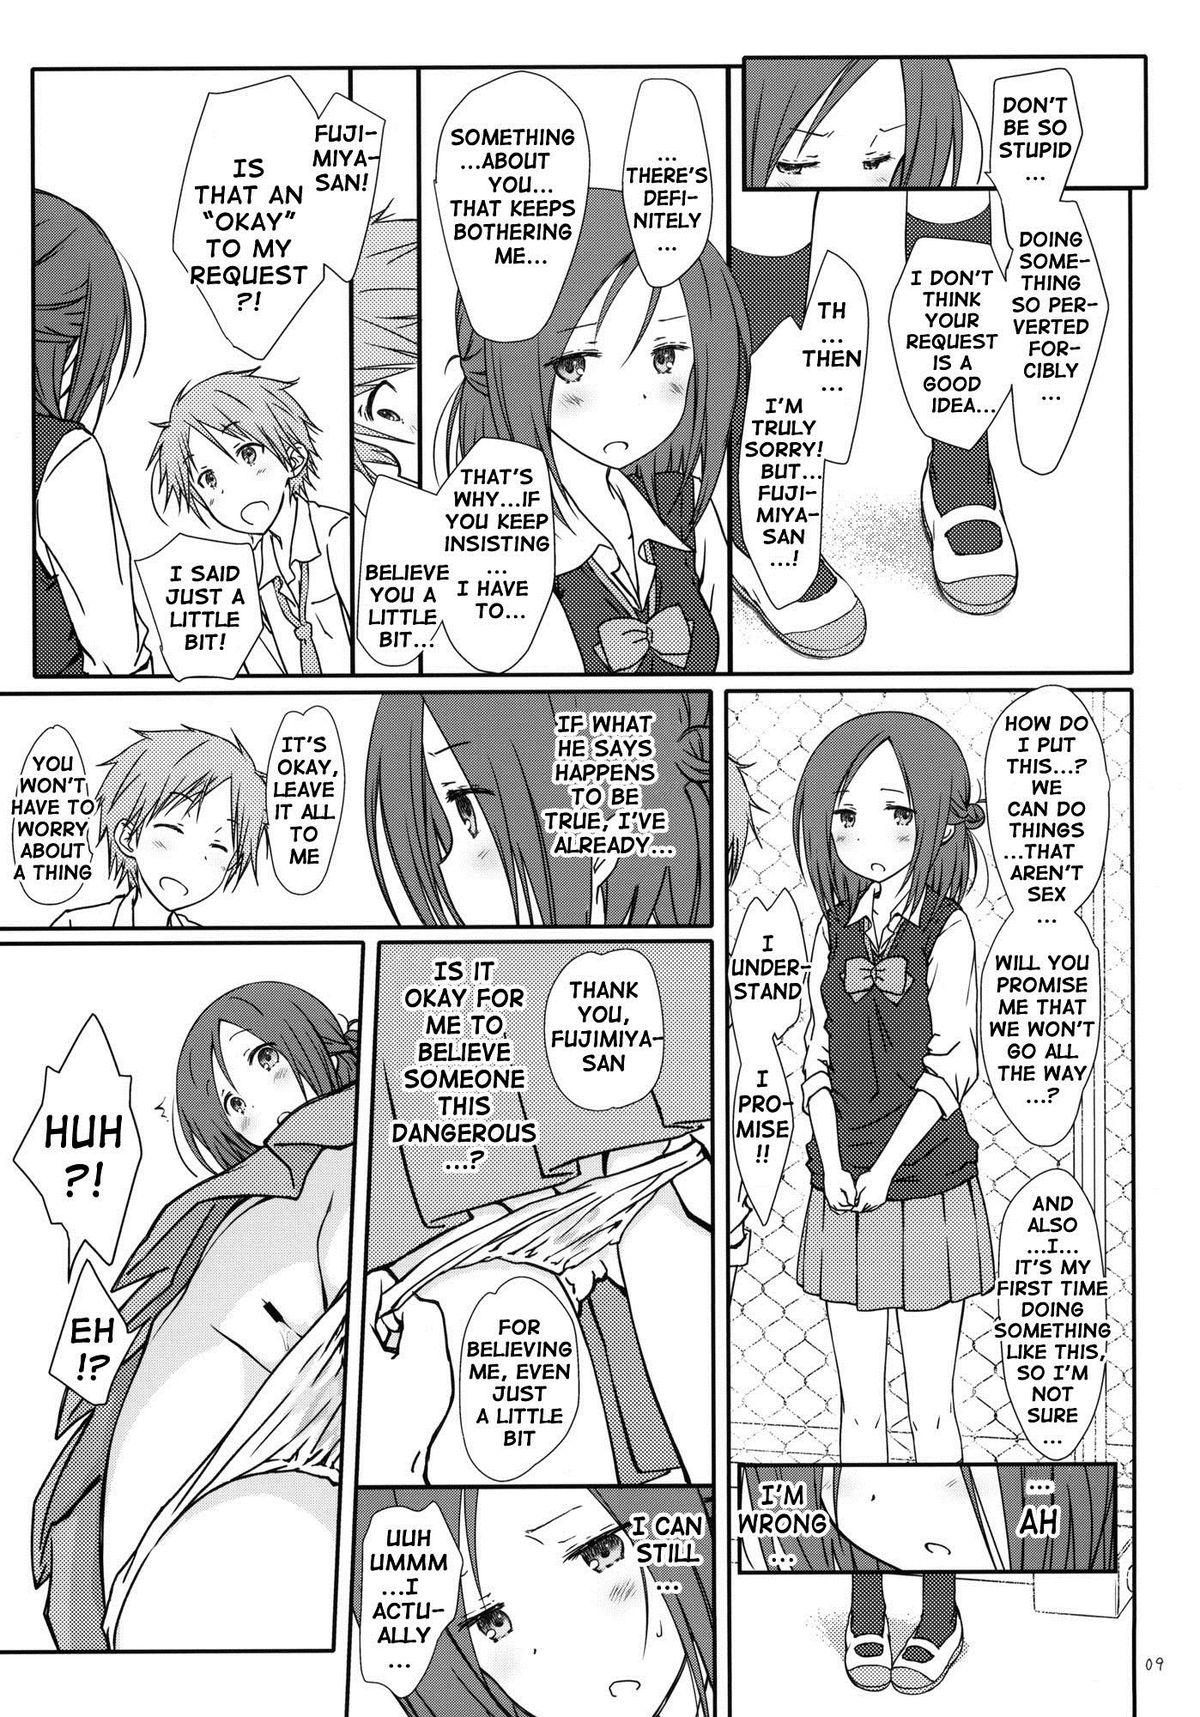 Romantic "Tomodachi to no Sex." | Sex With Friends - One week friends Hot Whores - Page 8